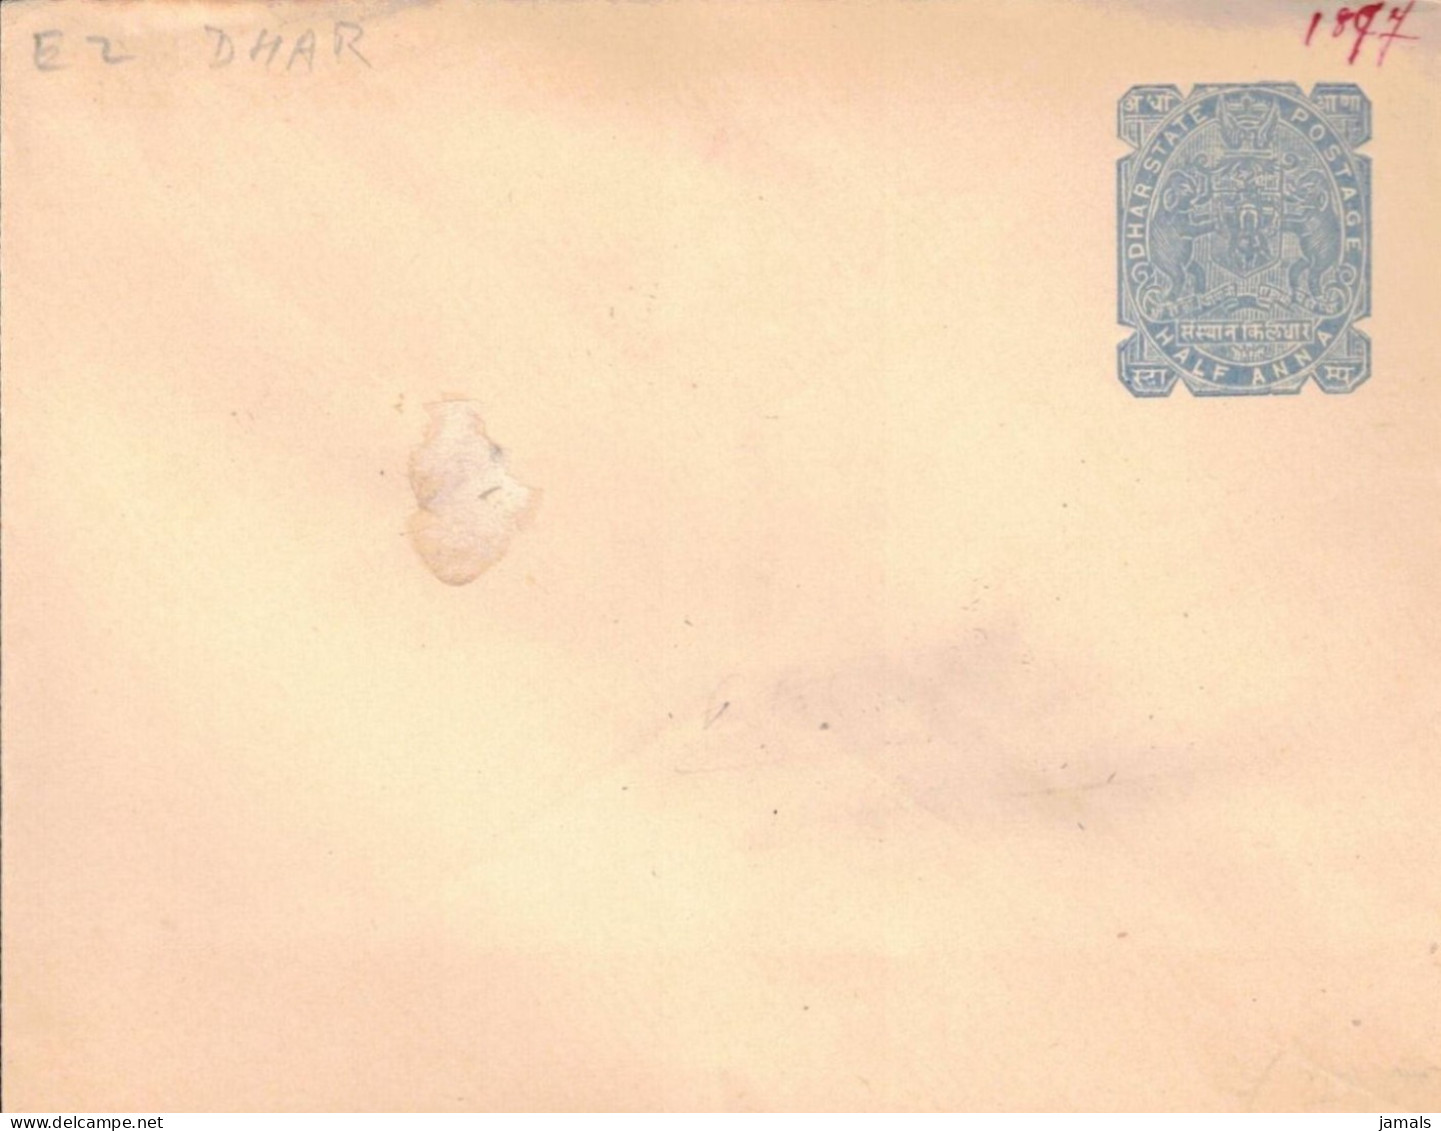 India, Princely State Dhar, Postal Stationery Envelope, Mint, Condition As Scan Inde Indien - Dhar